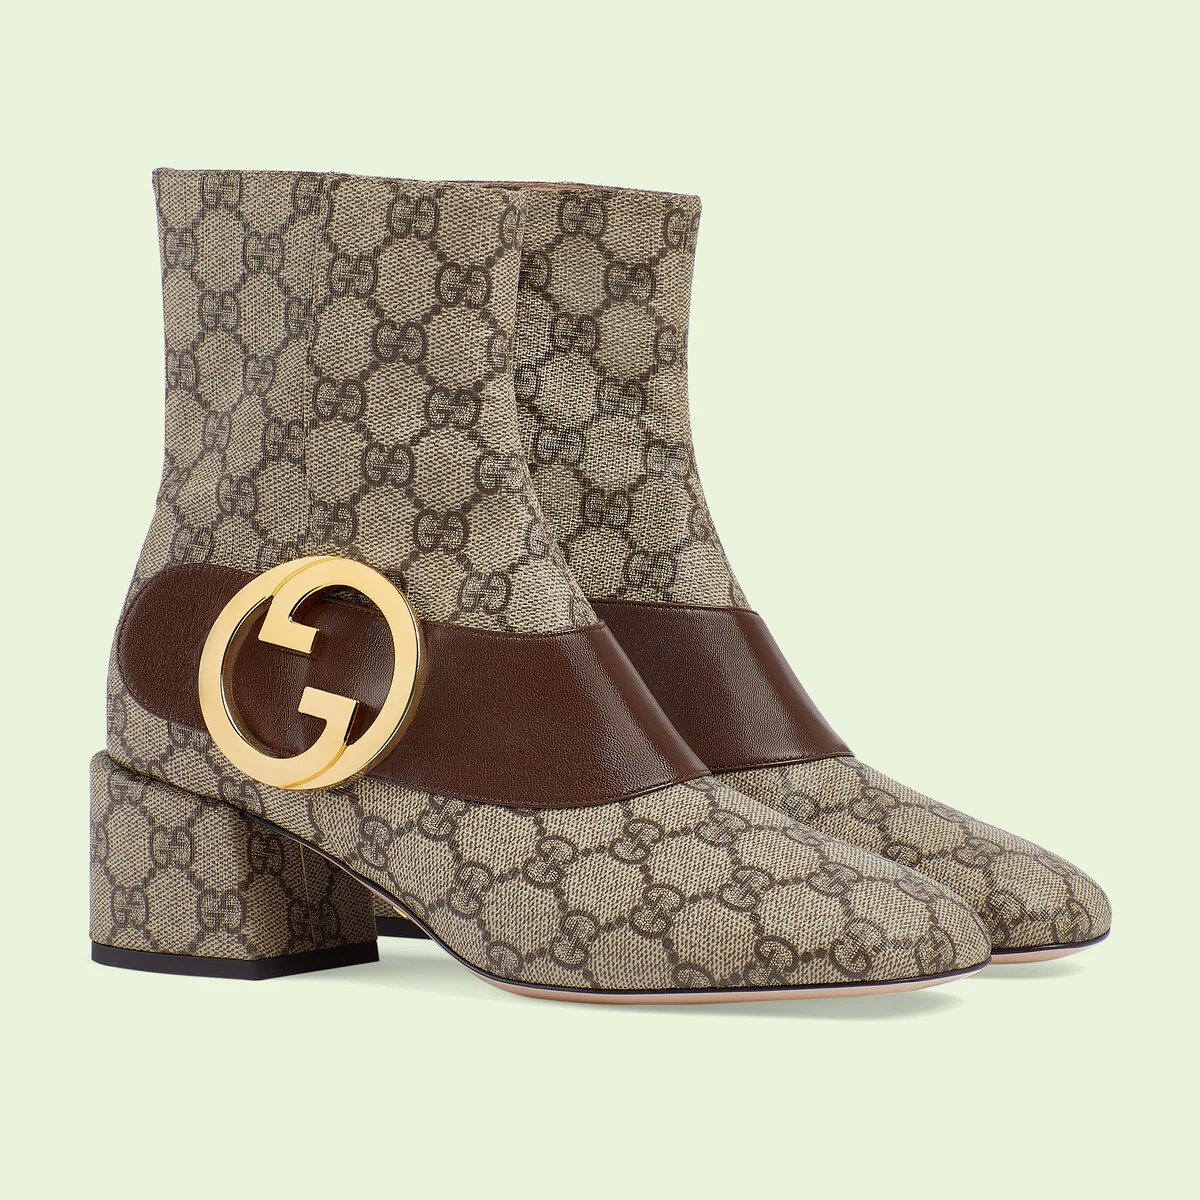 Gucci Blondie women's ankle boot - 2